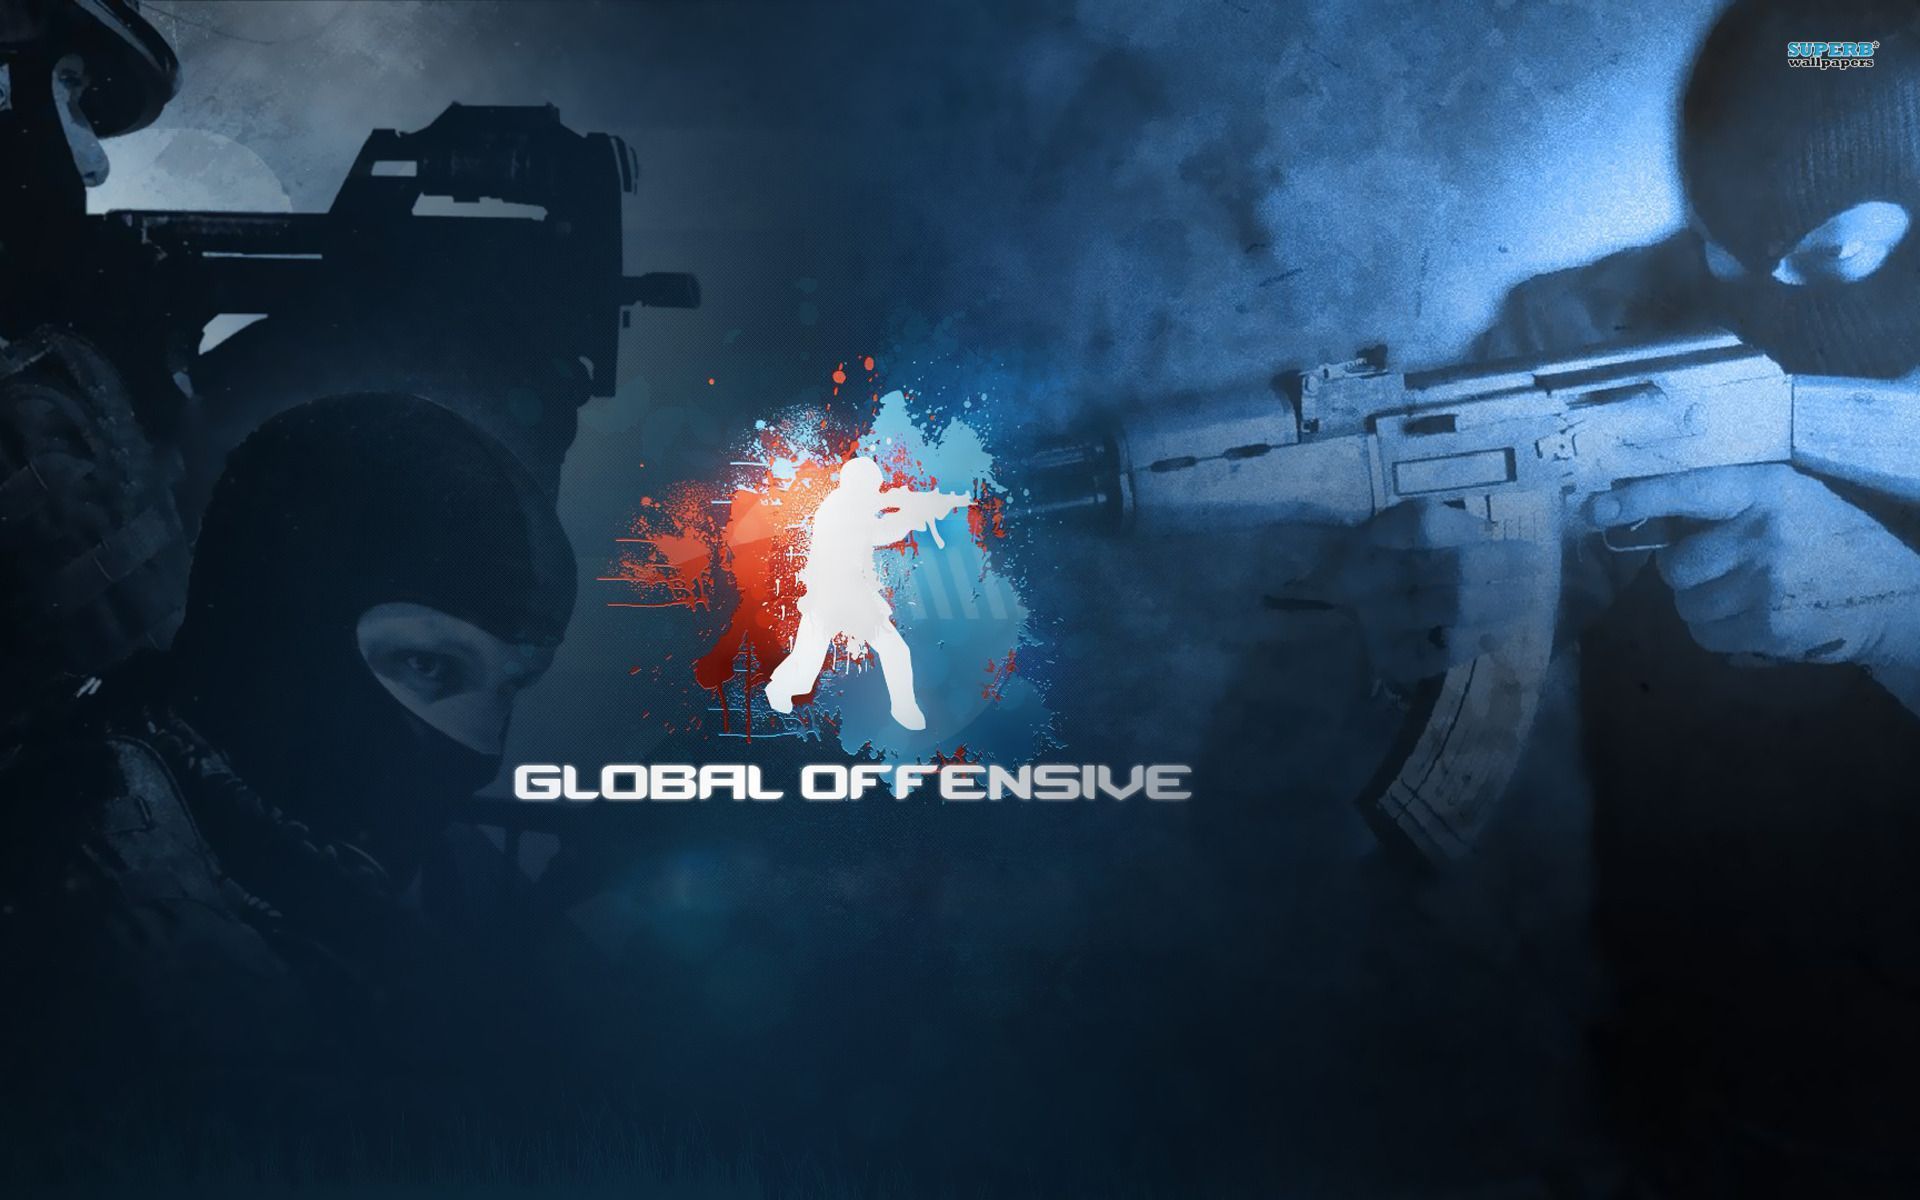 Counter-Strike: Global Offensive wallpaper - Game wallpapers - #14747